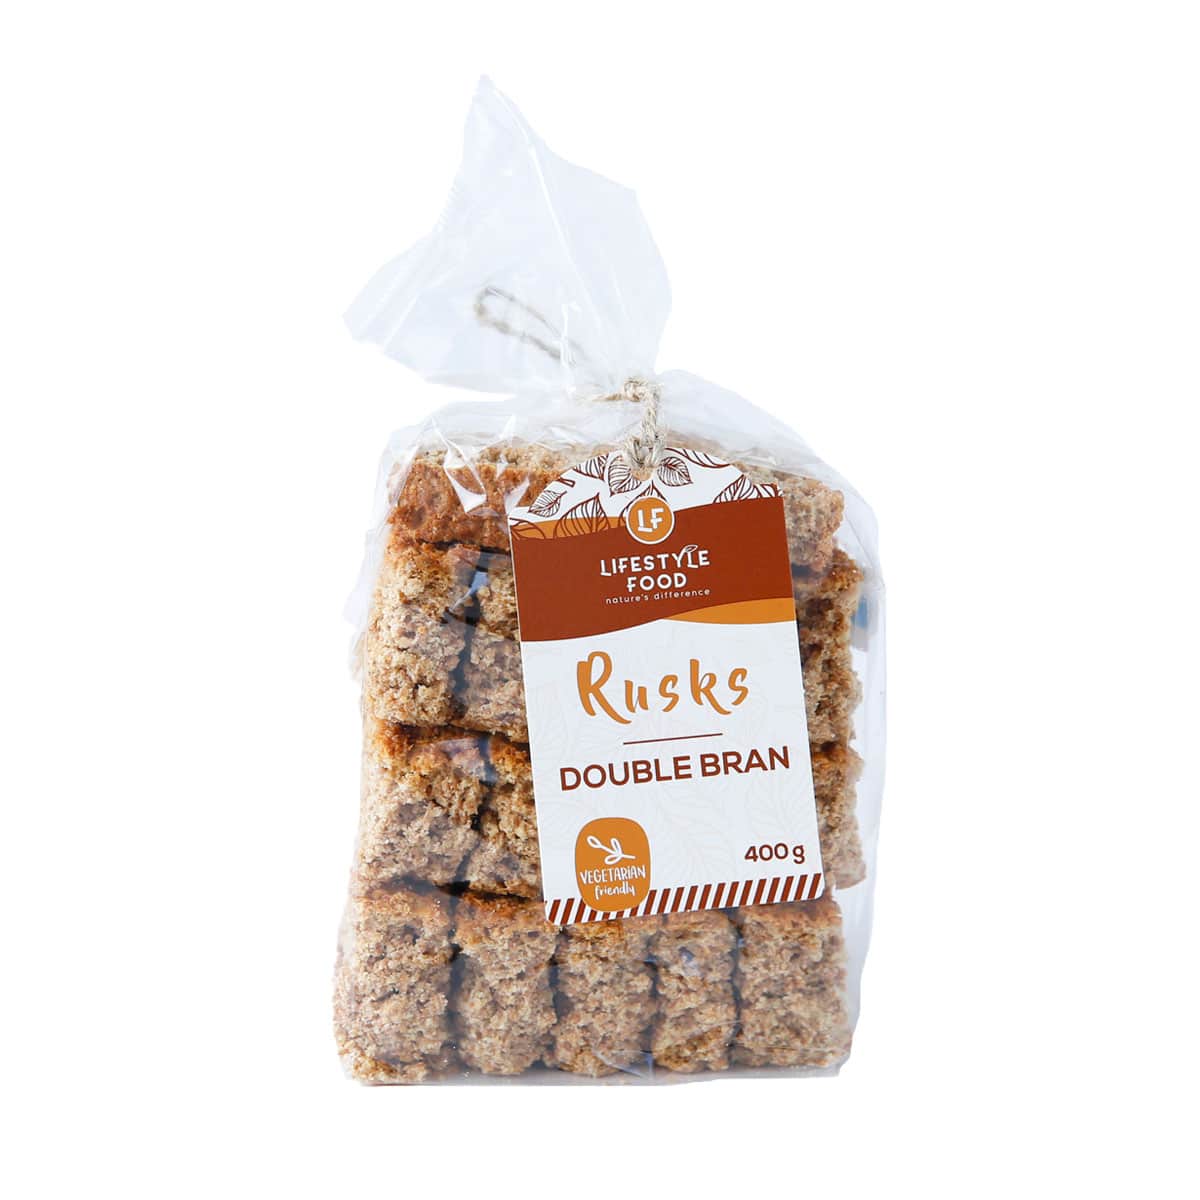 Lifestyle Food Double Bran Rusks - 400g